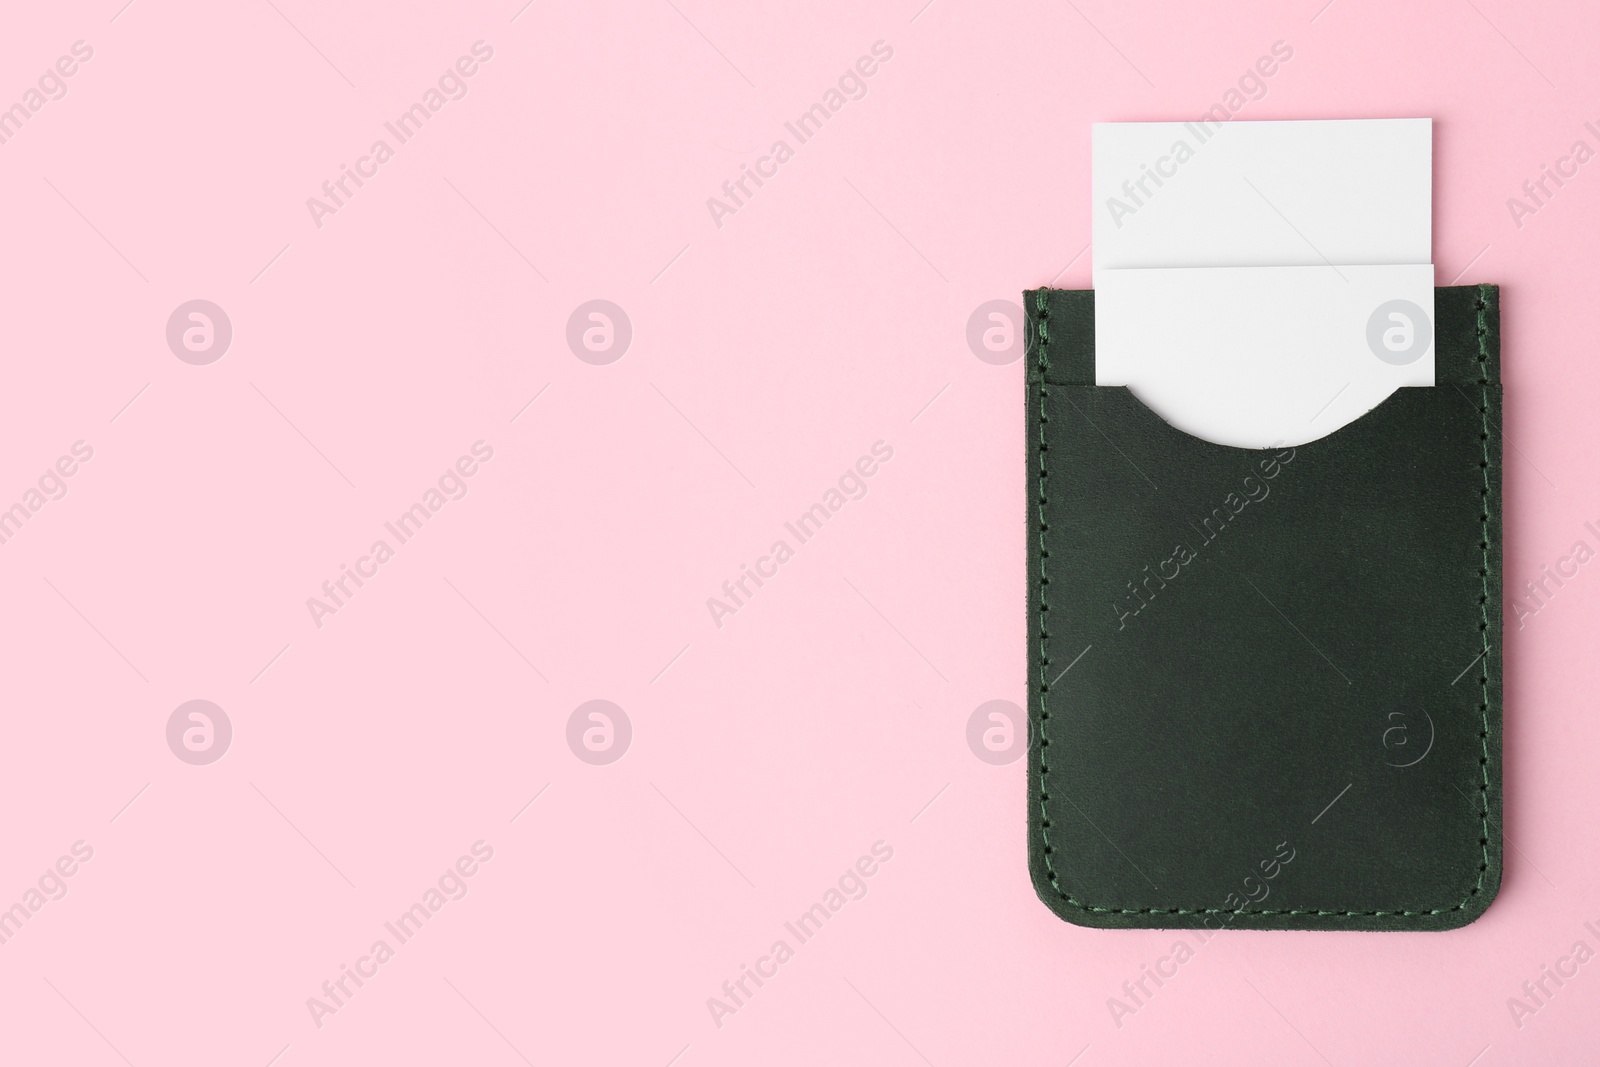 Photo of Leather business card holder with blank cards on pink background, top view. Space for text